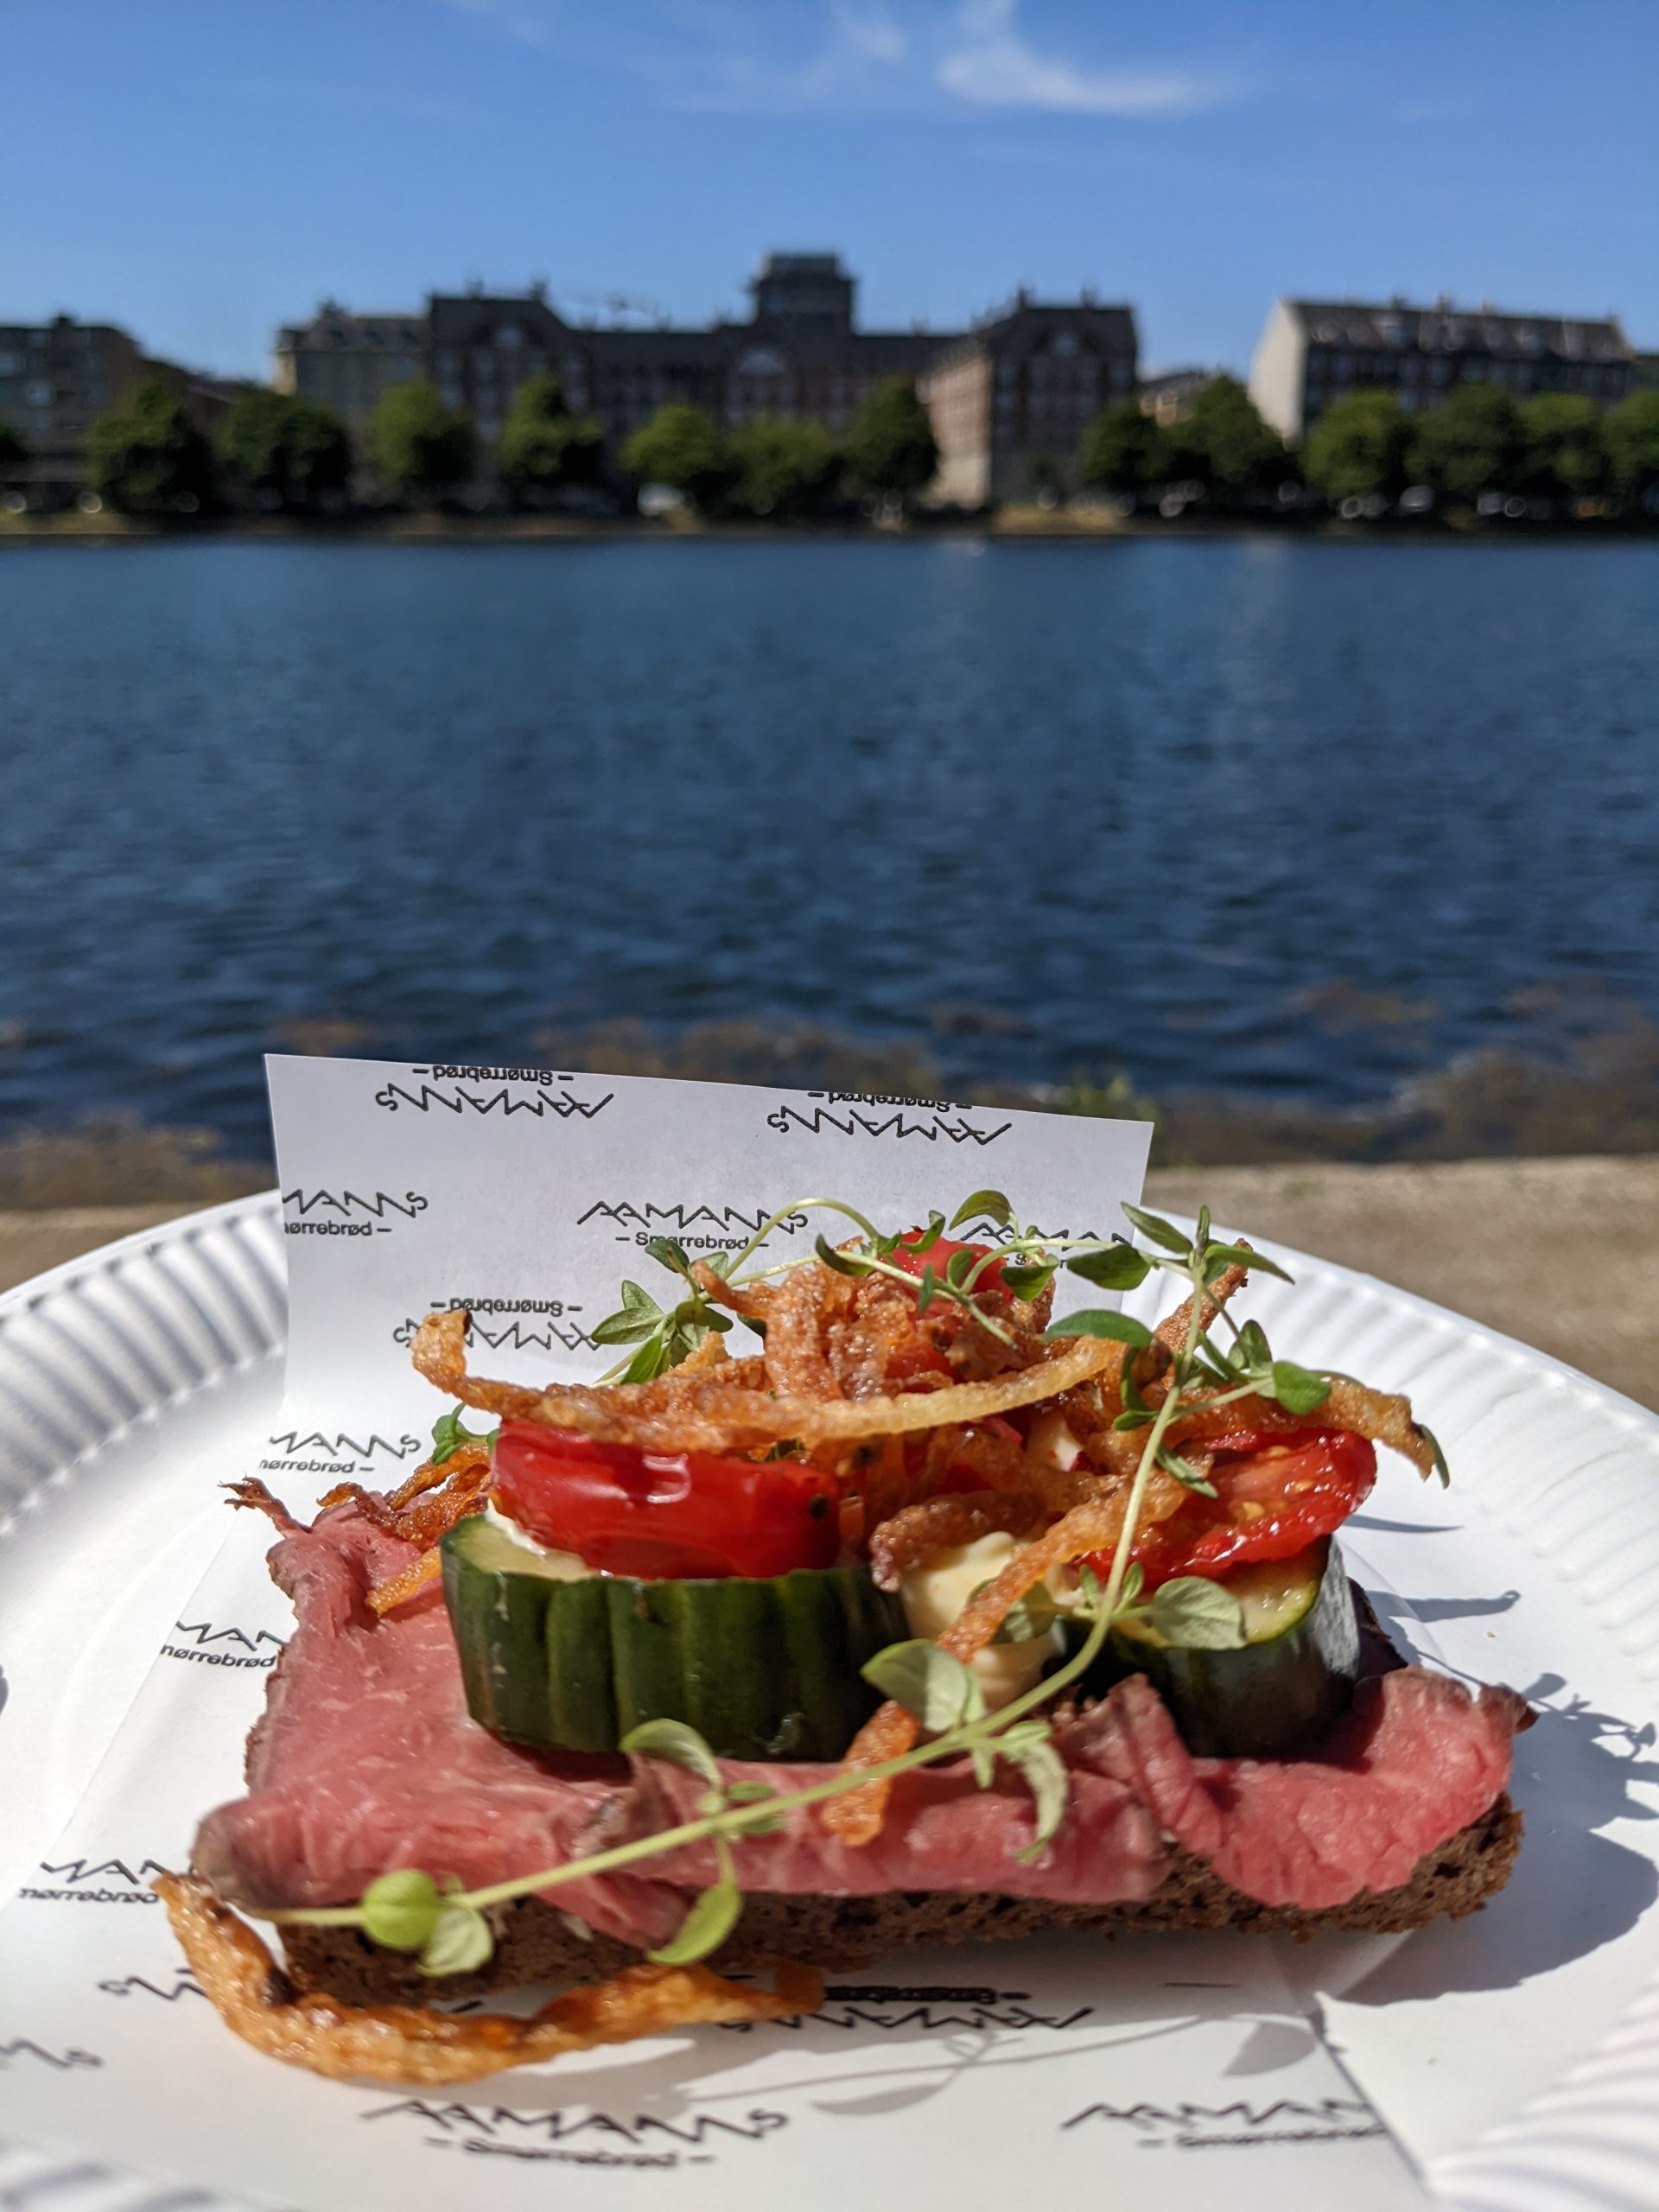 A plate holding an open faced sandwich sits in front of a lake